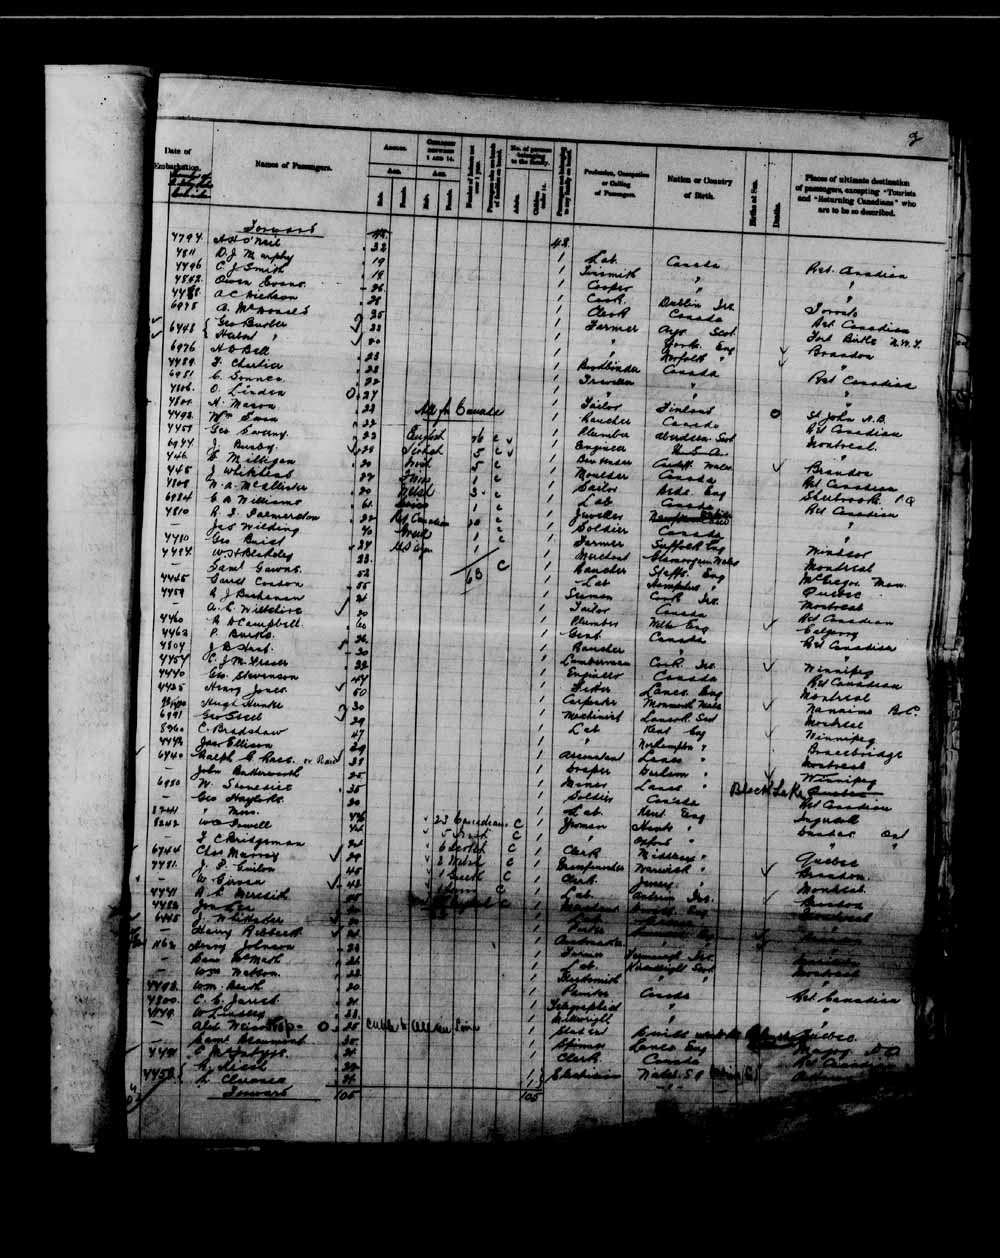 Digitized page of Quebec Passenger Lists for Image No.: e003653245